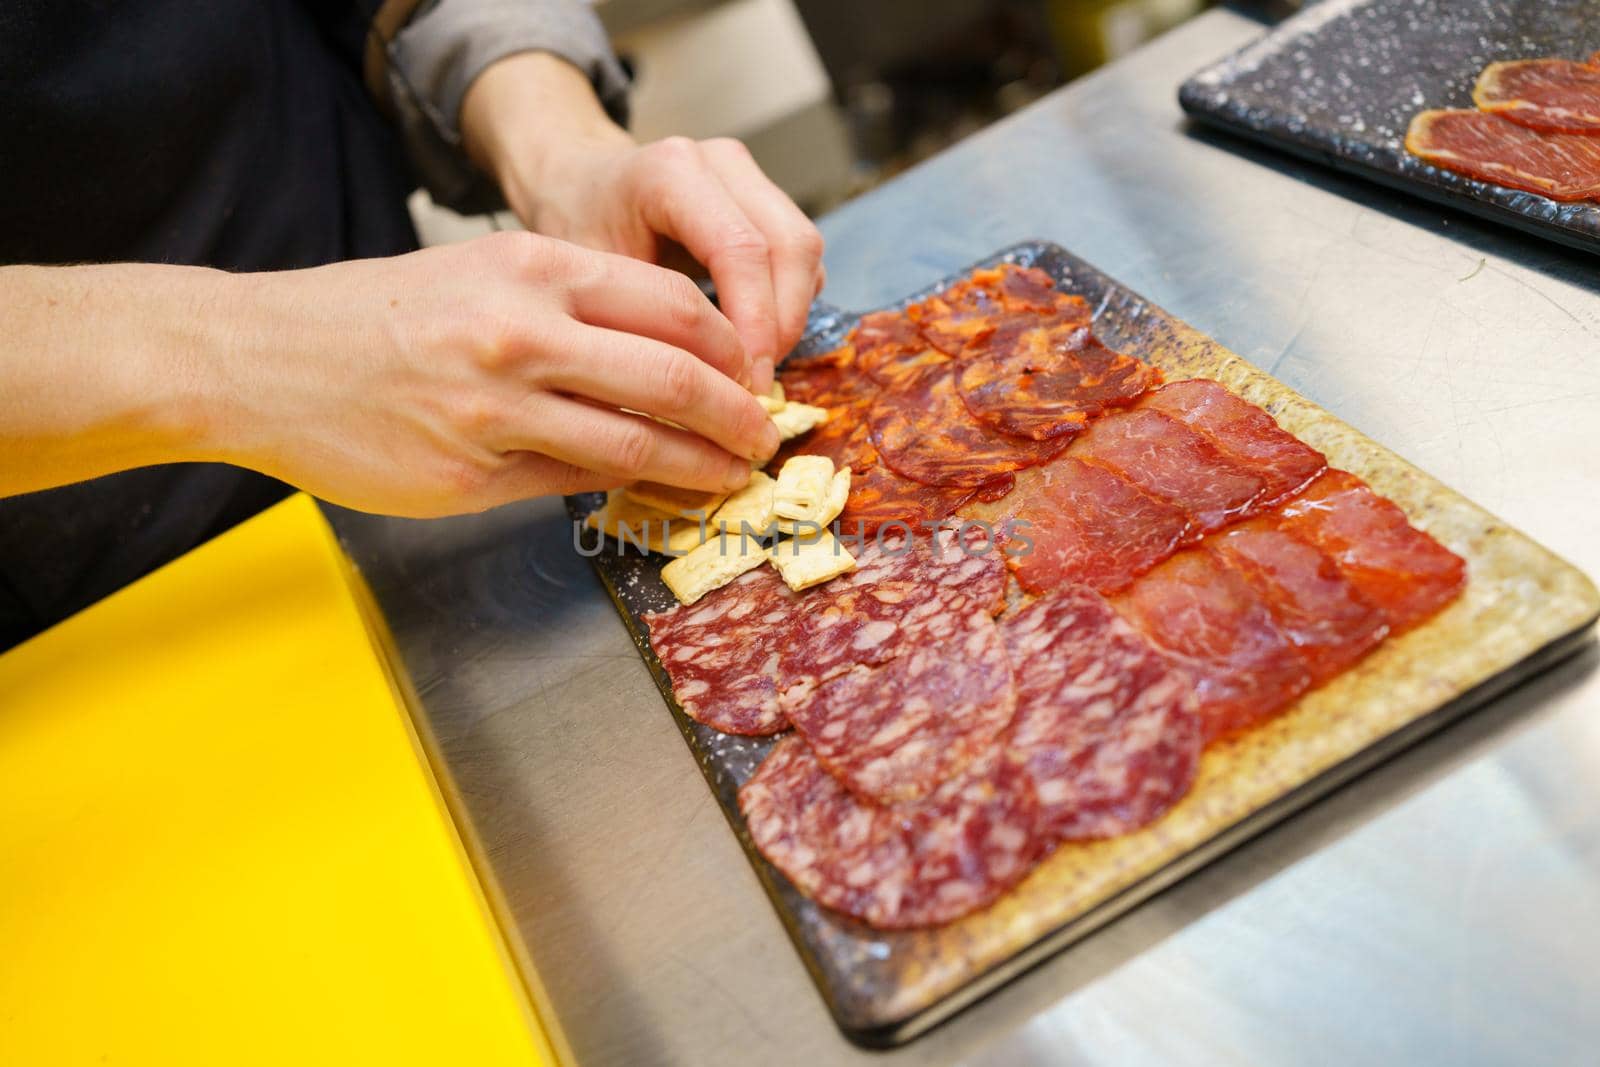 Unrecognizable chef preparing a plate of Iberian cured meats platter. A typical dish of Spanish cuisine. with crackers placed on board.